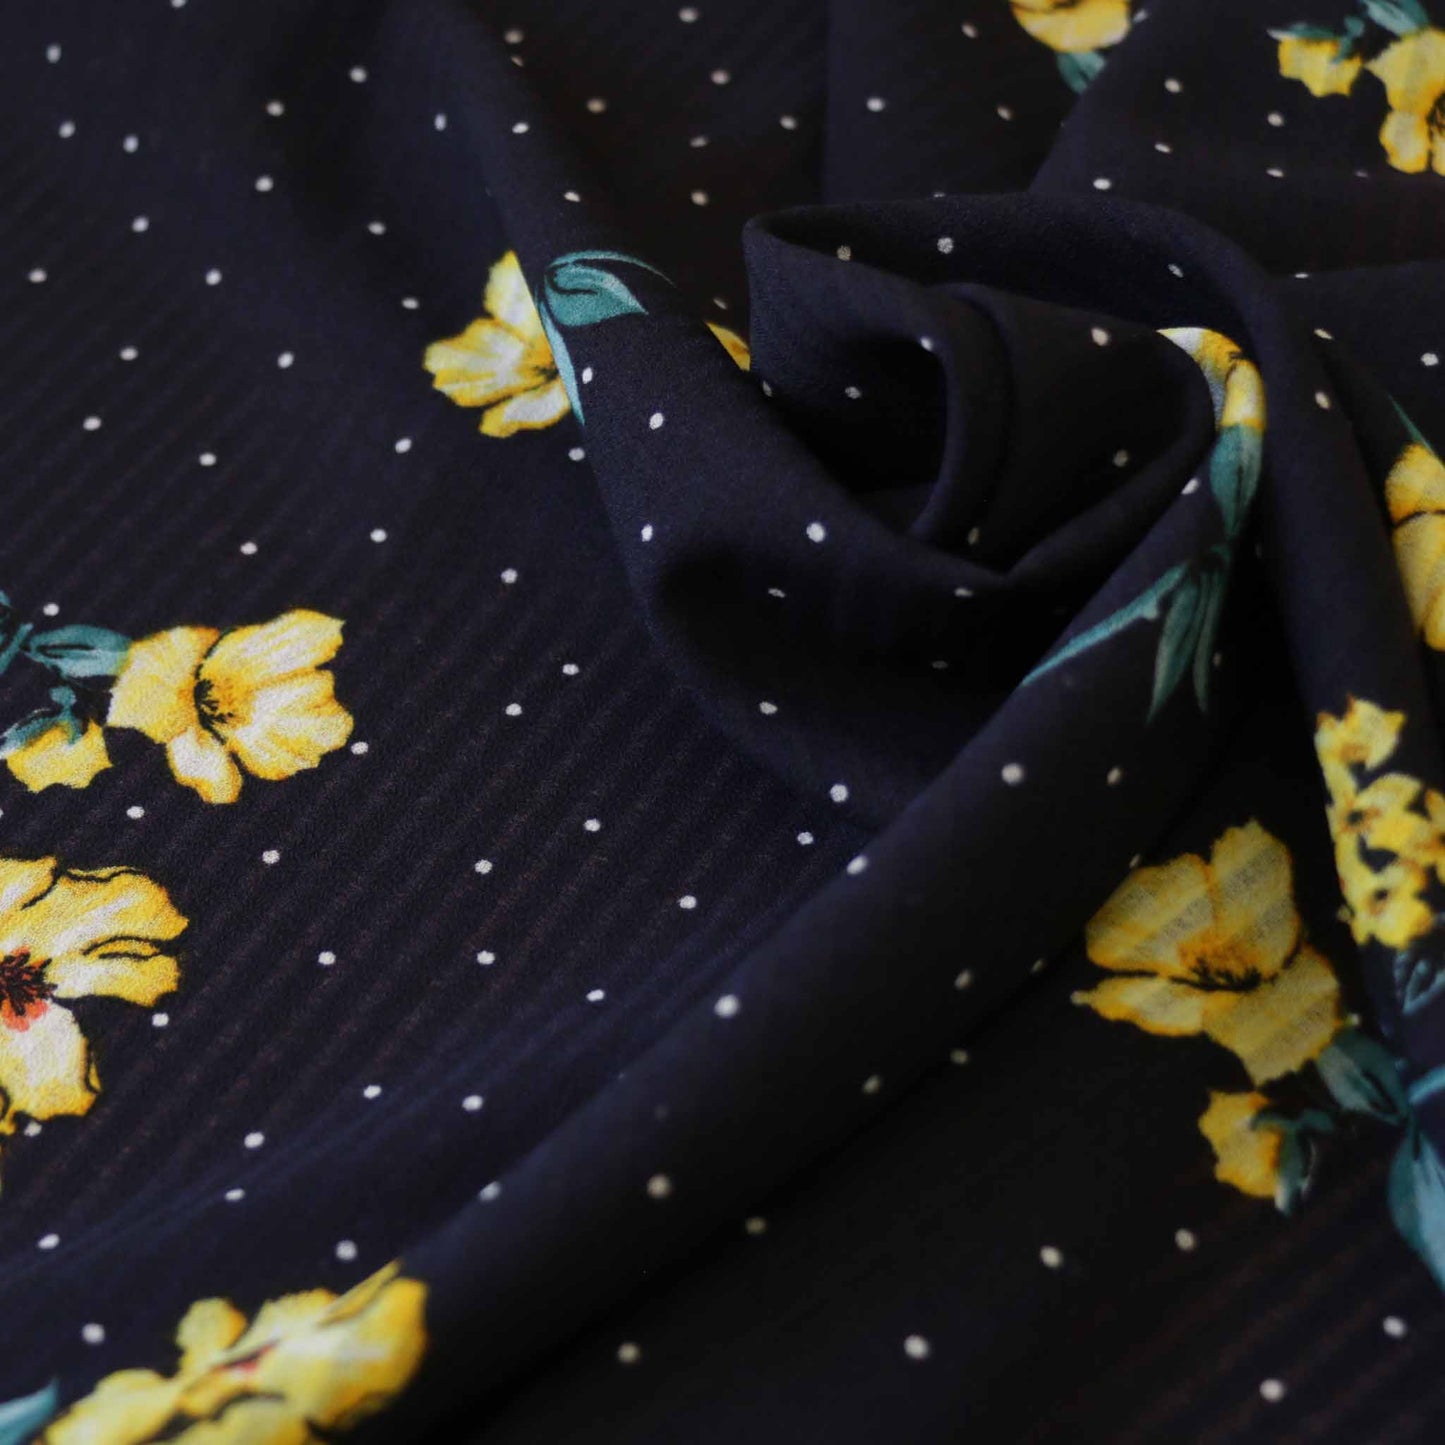 yellow flower print on navy blue georgette dressmaking fabric with polka dots